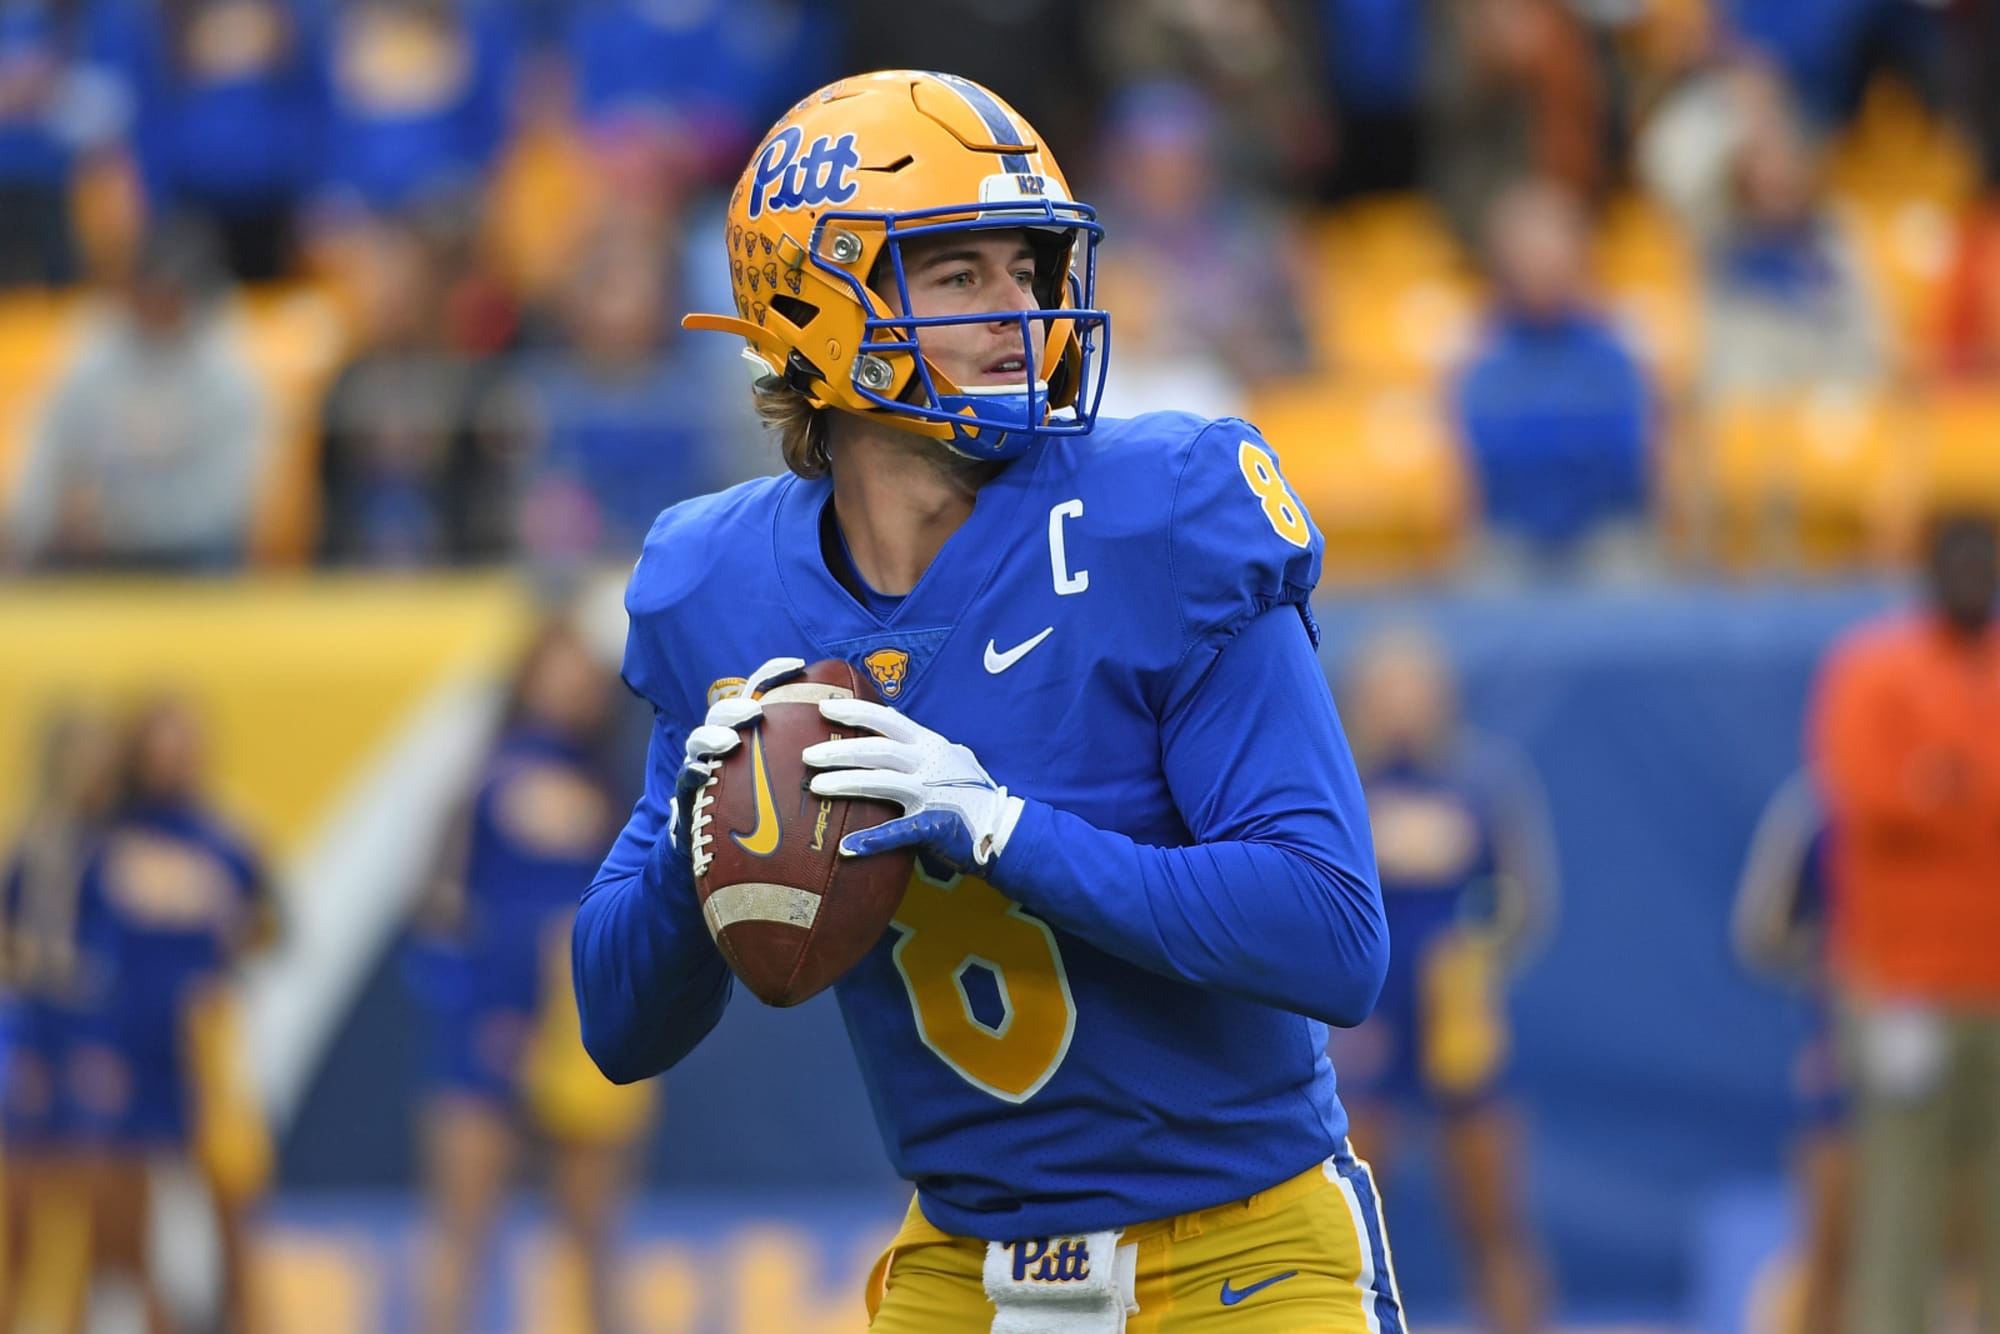 3 reasons why the Steelers should draft QB Kenny Pickett